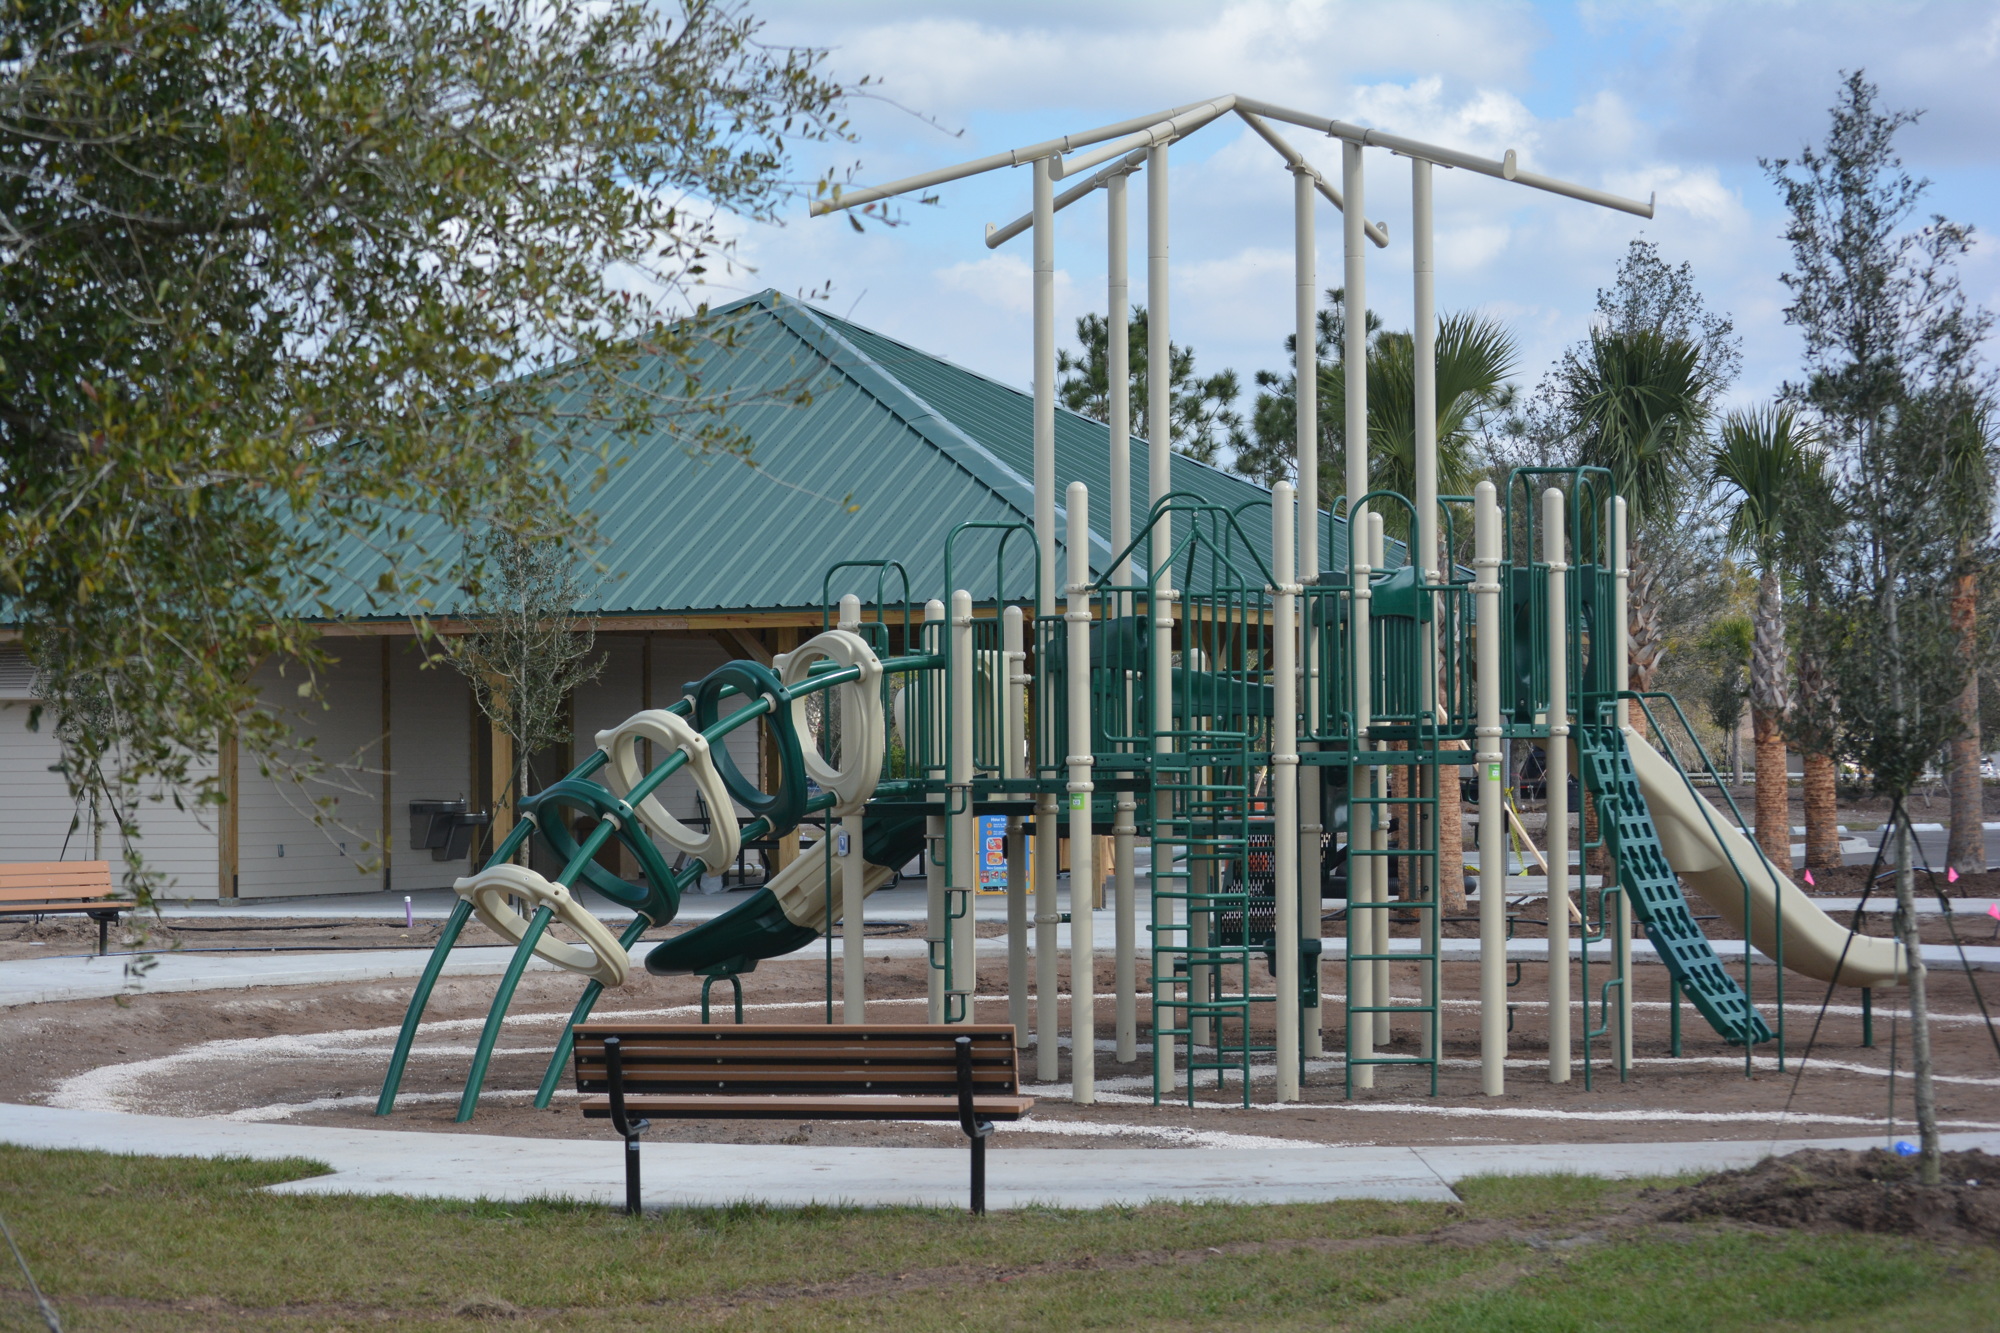 Gardner Park will have a grand opening on April 21.